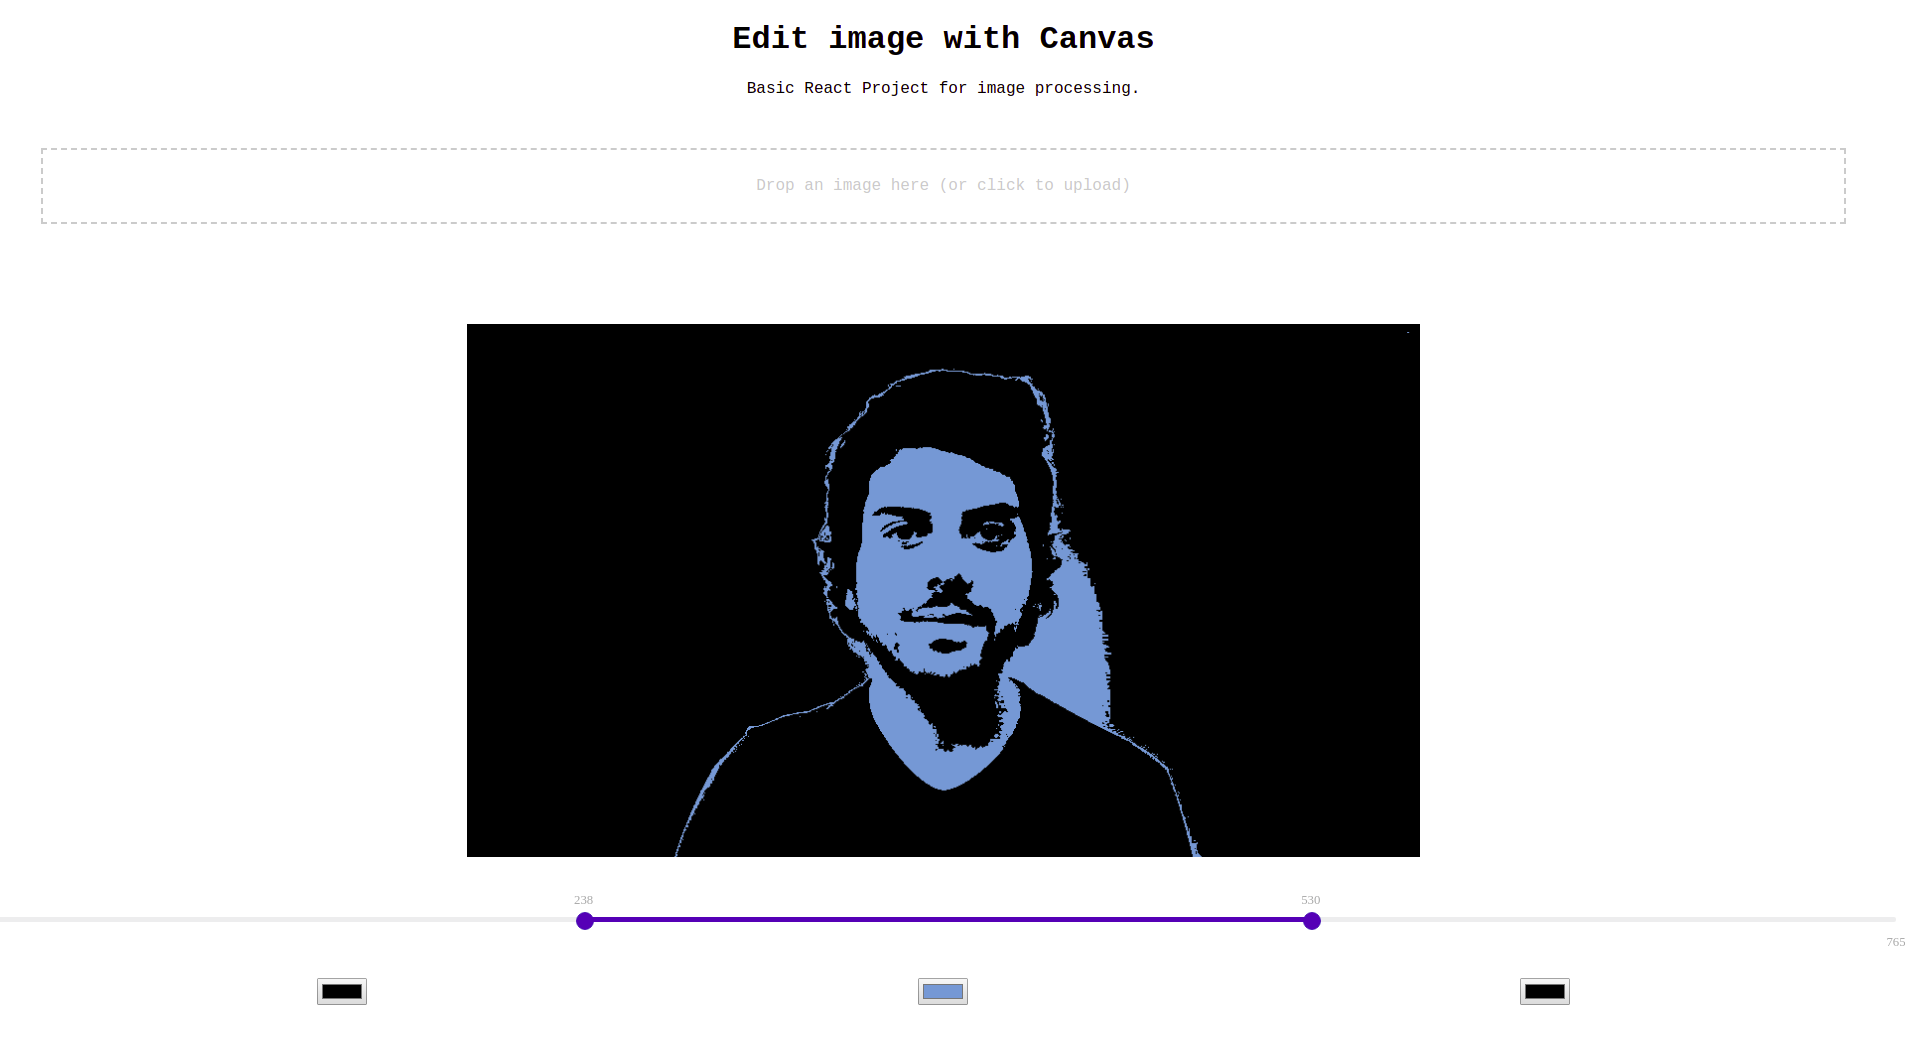 Image Edition with canvas in React